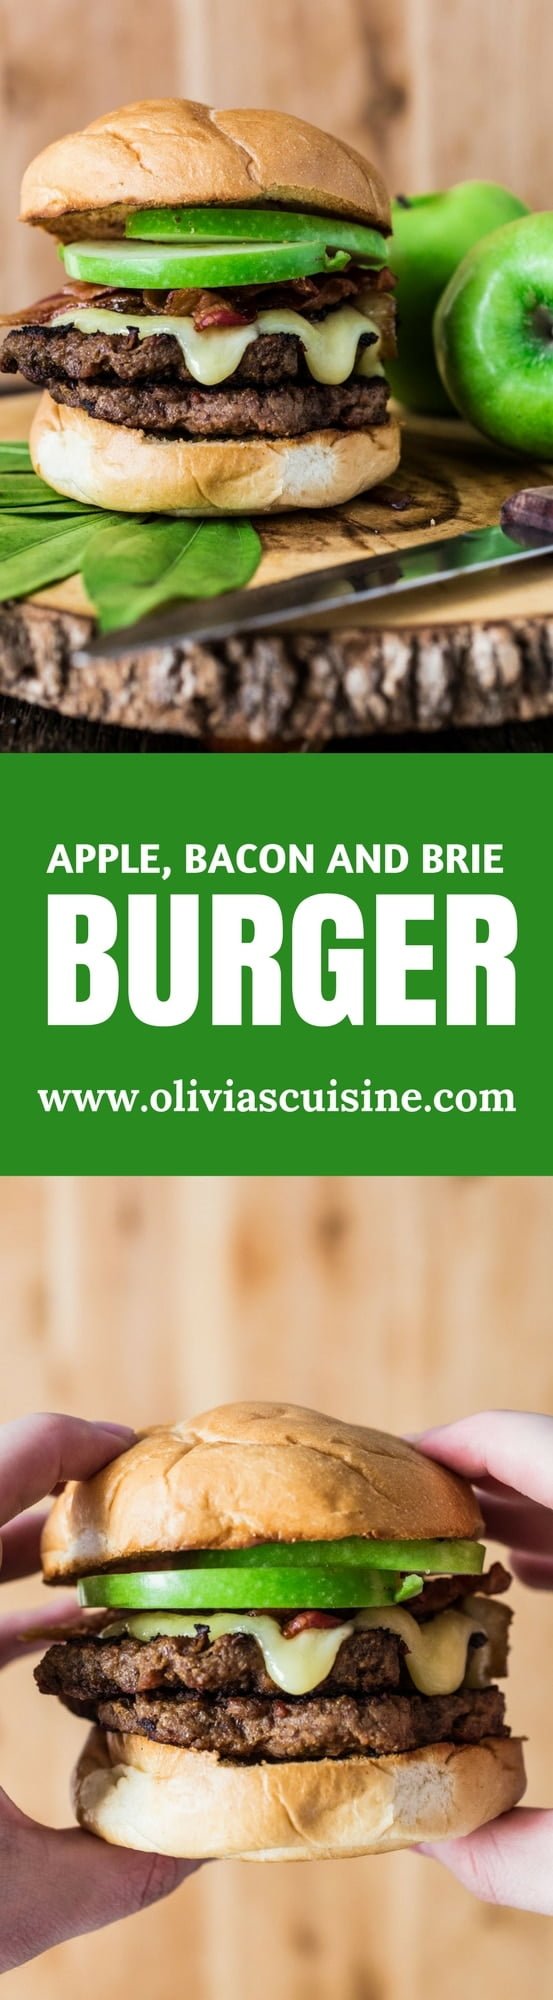 Apple, Bacon and Brie Burger | www.oliviascuisine.com | The epitome of fall, this delicious Apple, Bacon and Brie Burger will have you licking your fingers!